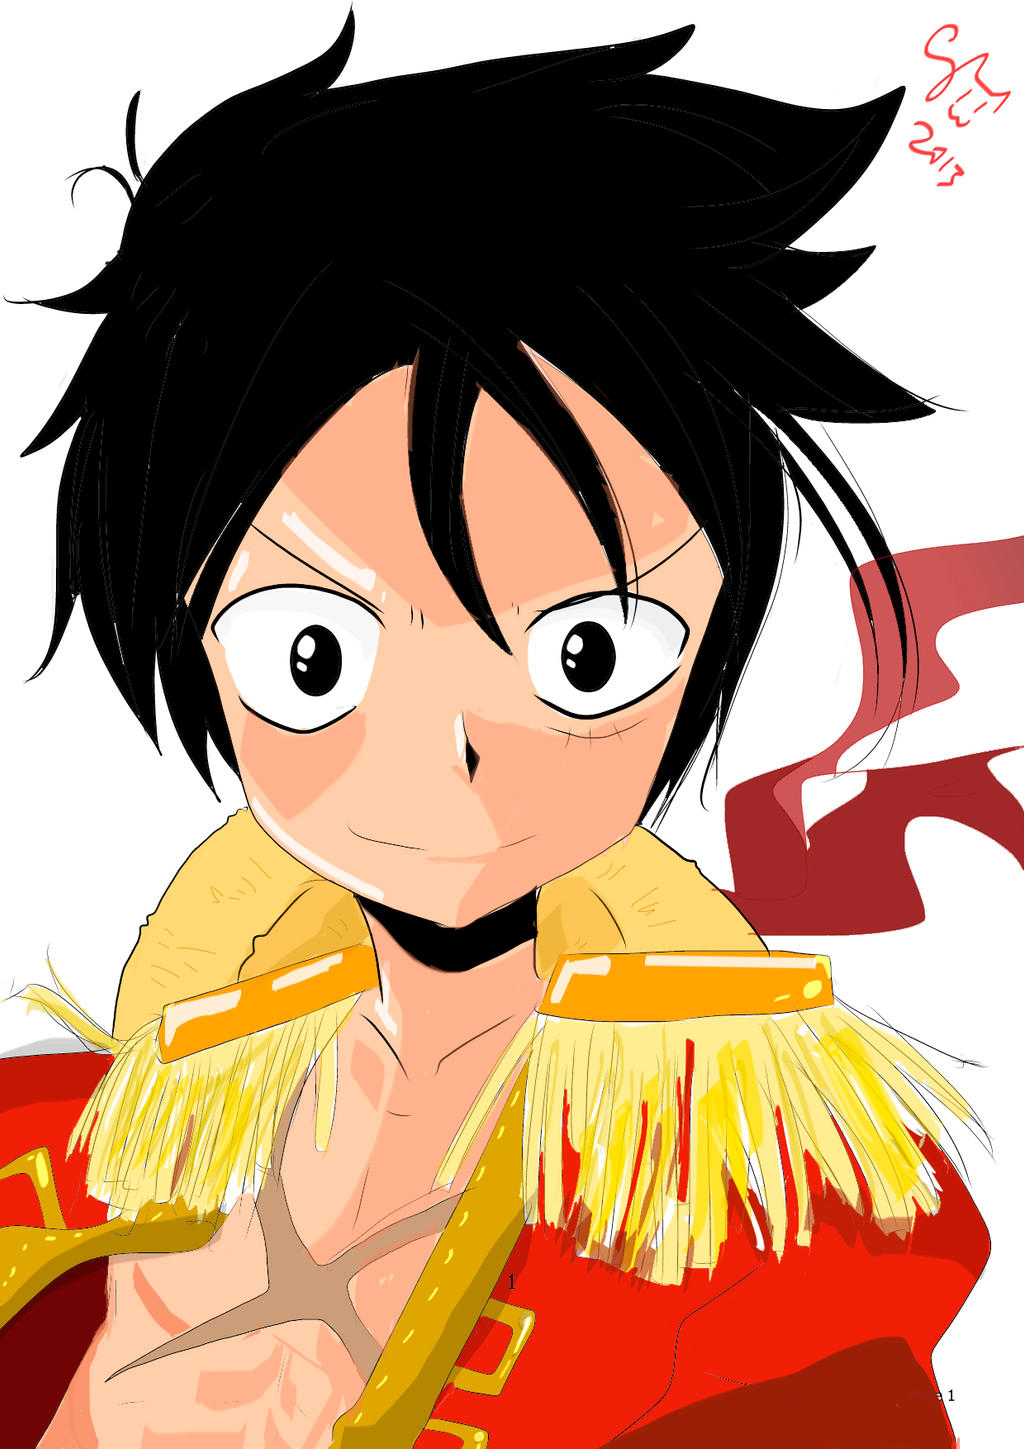 Luffy The Pirate King by minivitale on DeviantArt